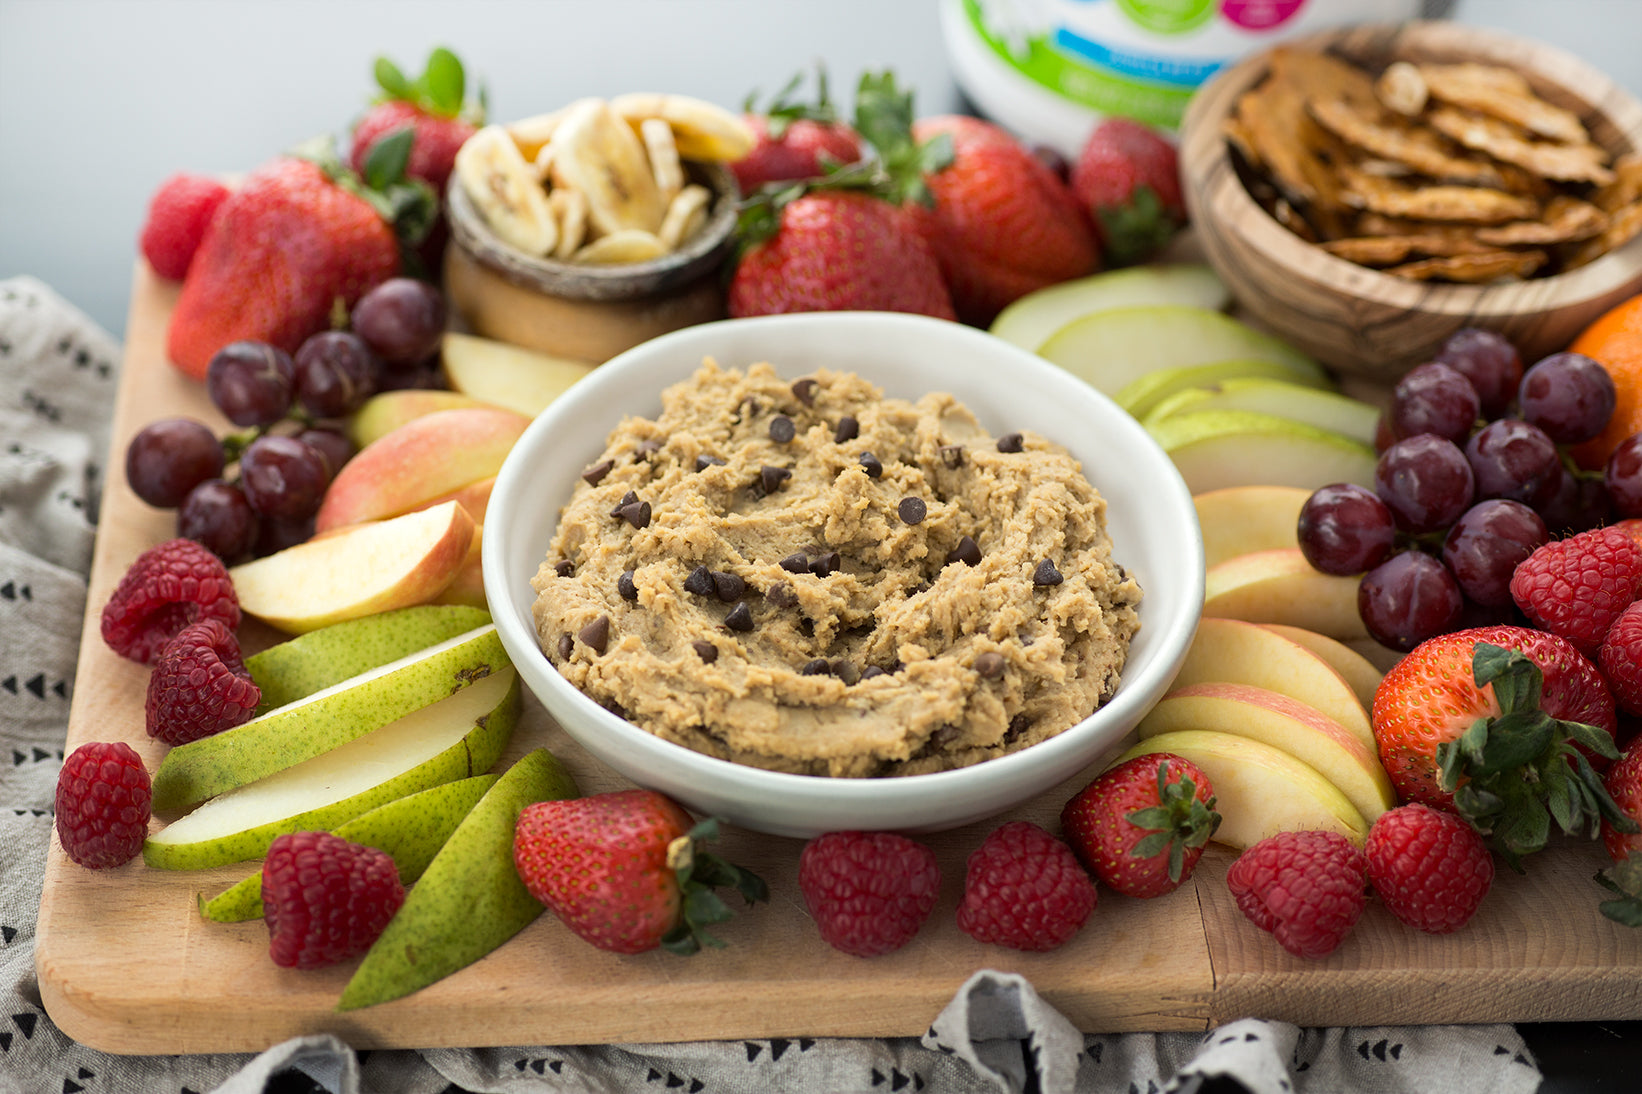 Game-Day Snack Board Recipe with Chocolate Chip Cookie Dough Dip